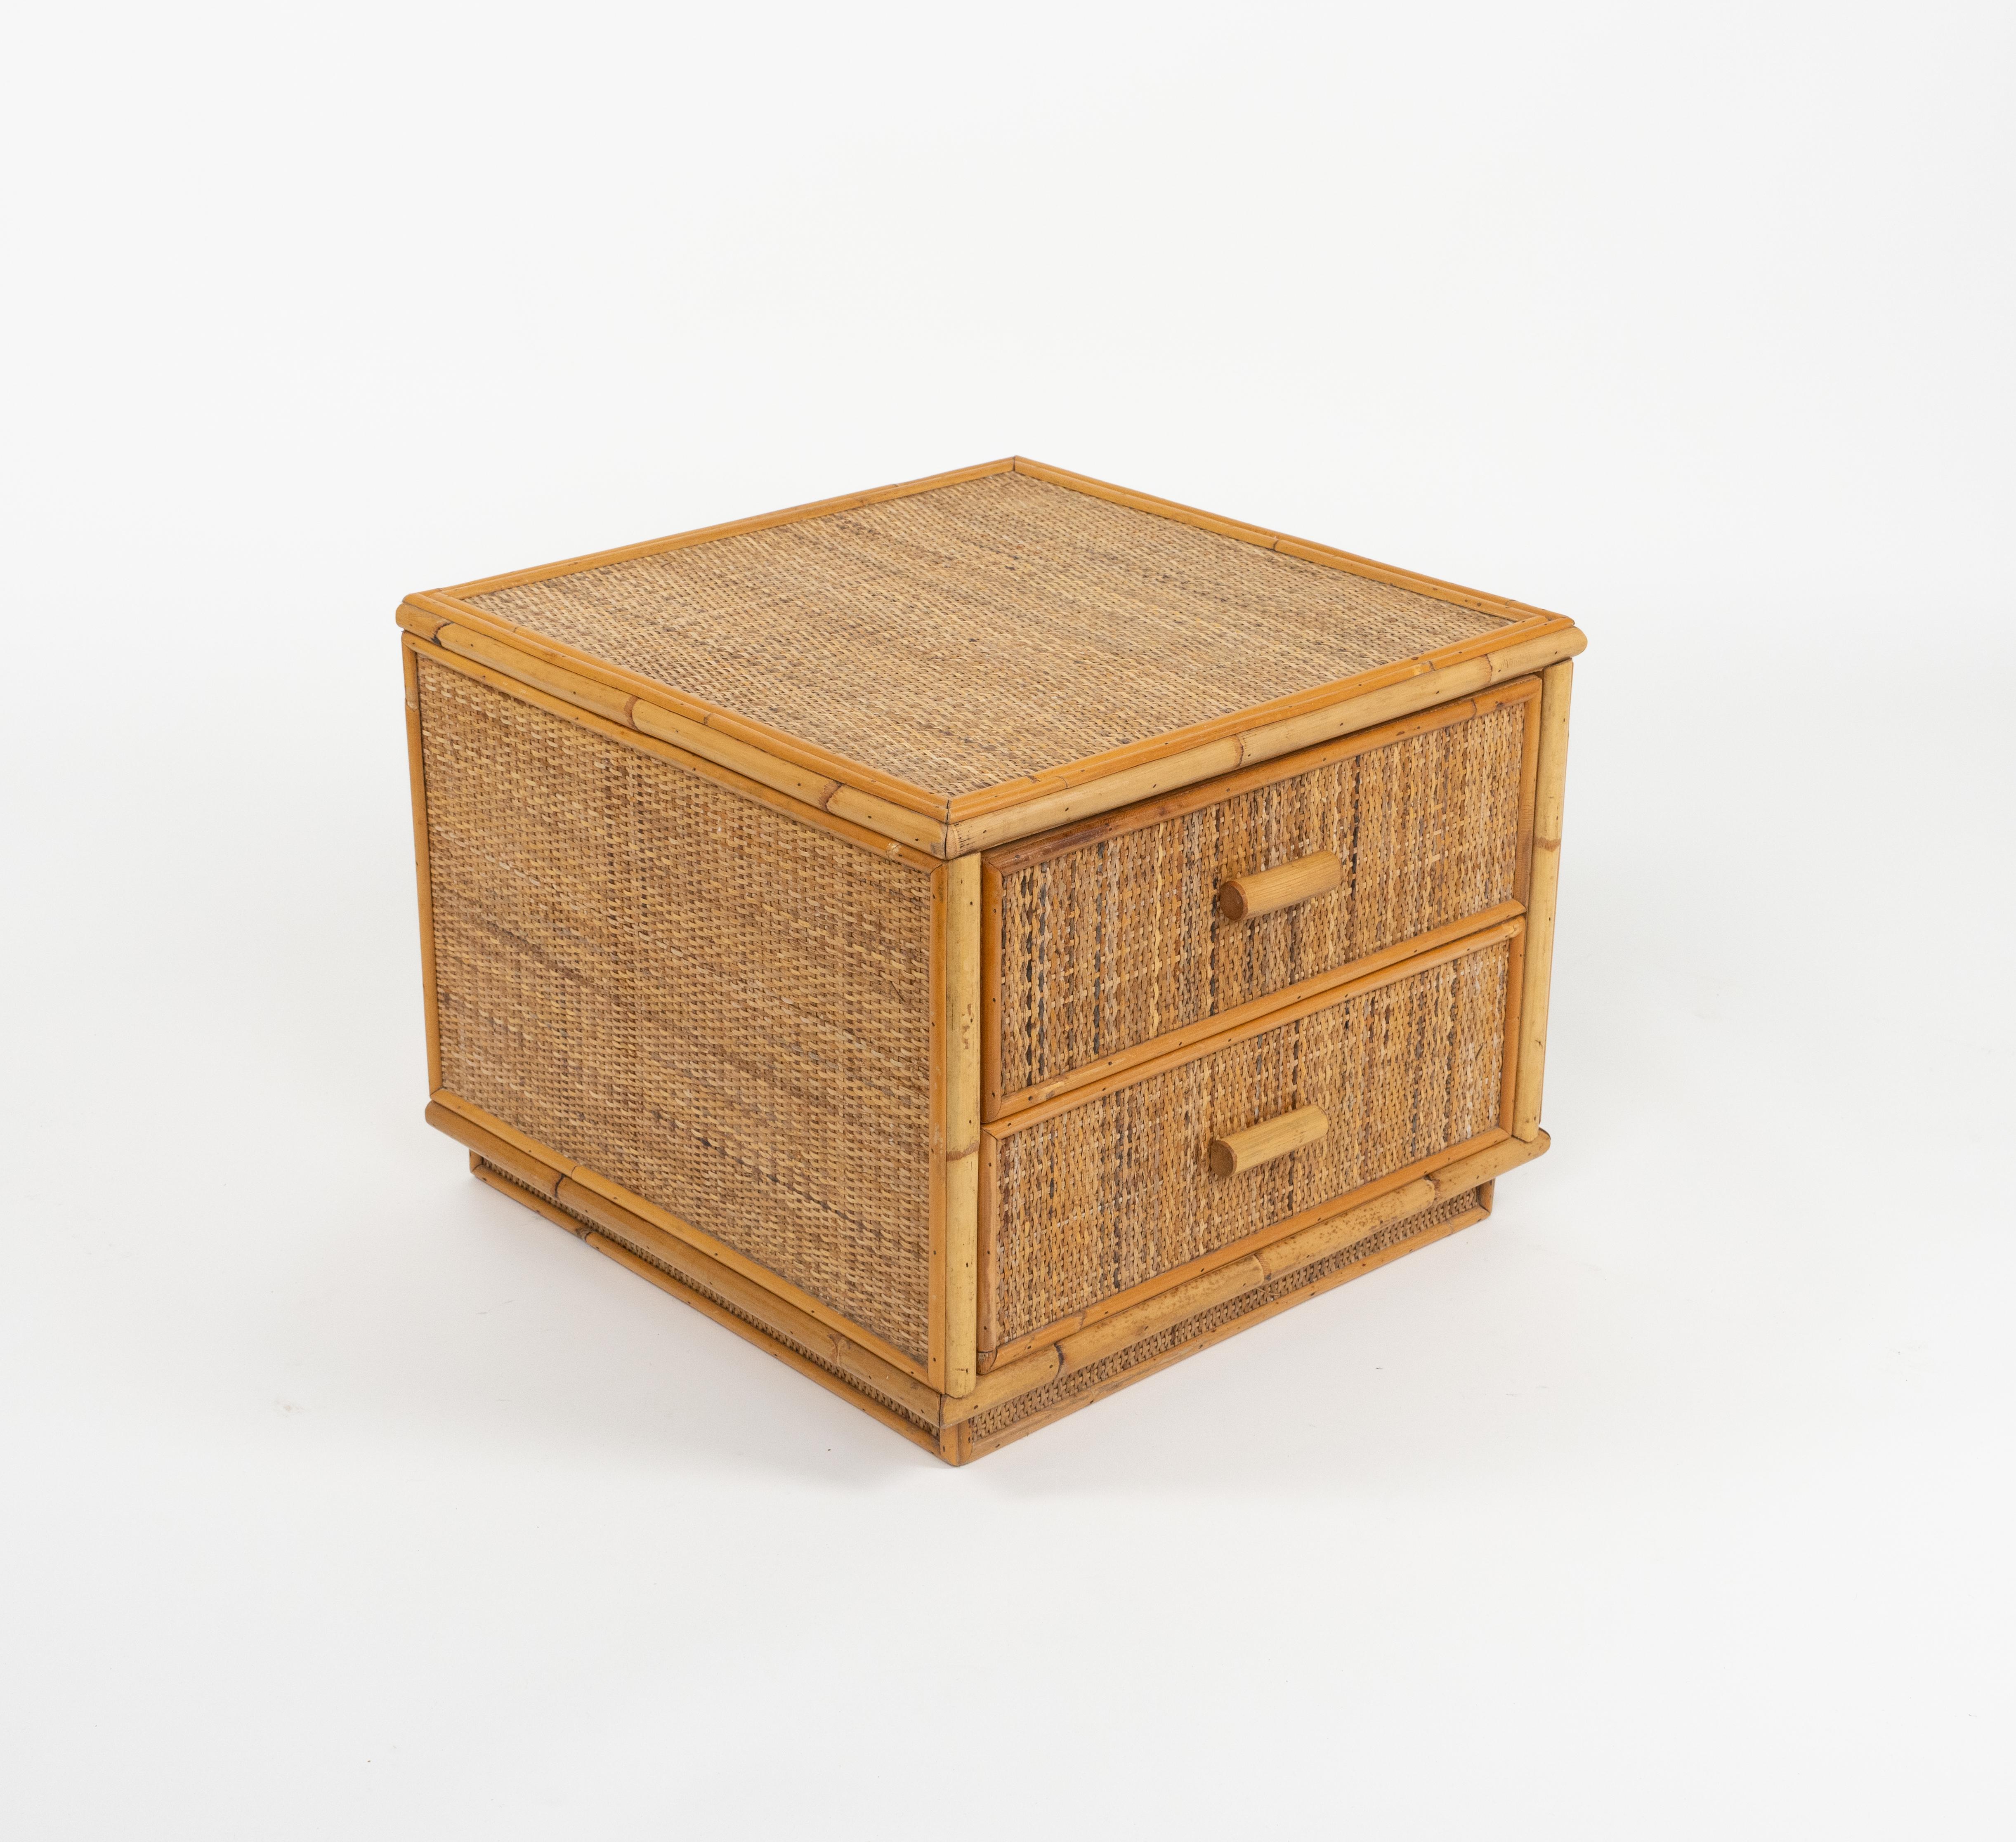 Bamboo and Rattan Pair of Bedside Tables Nightstands Dal Vera Style, Italy 1970s For Sale 3